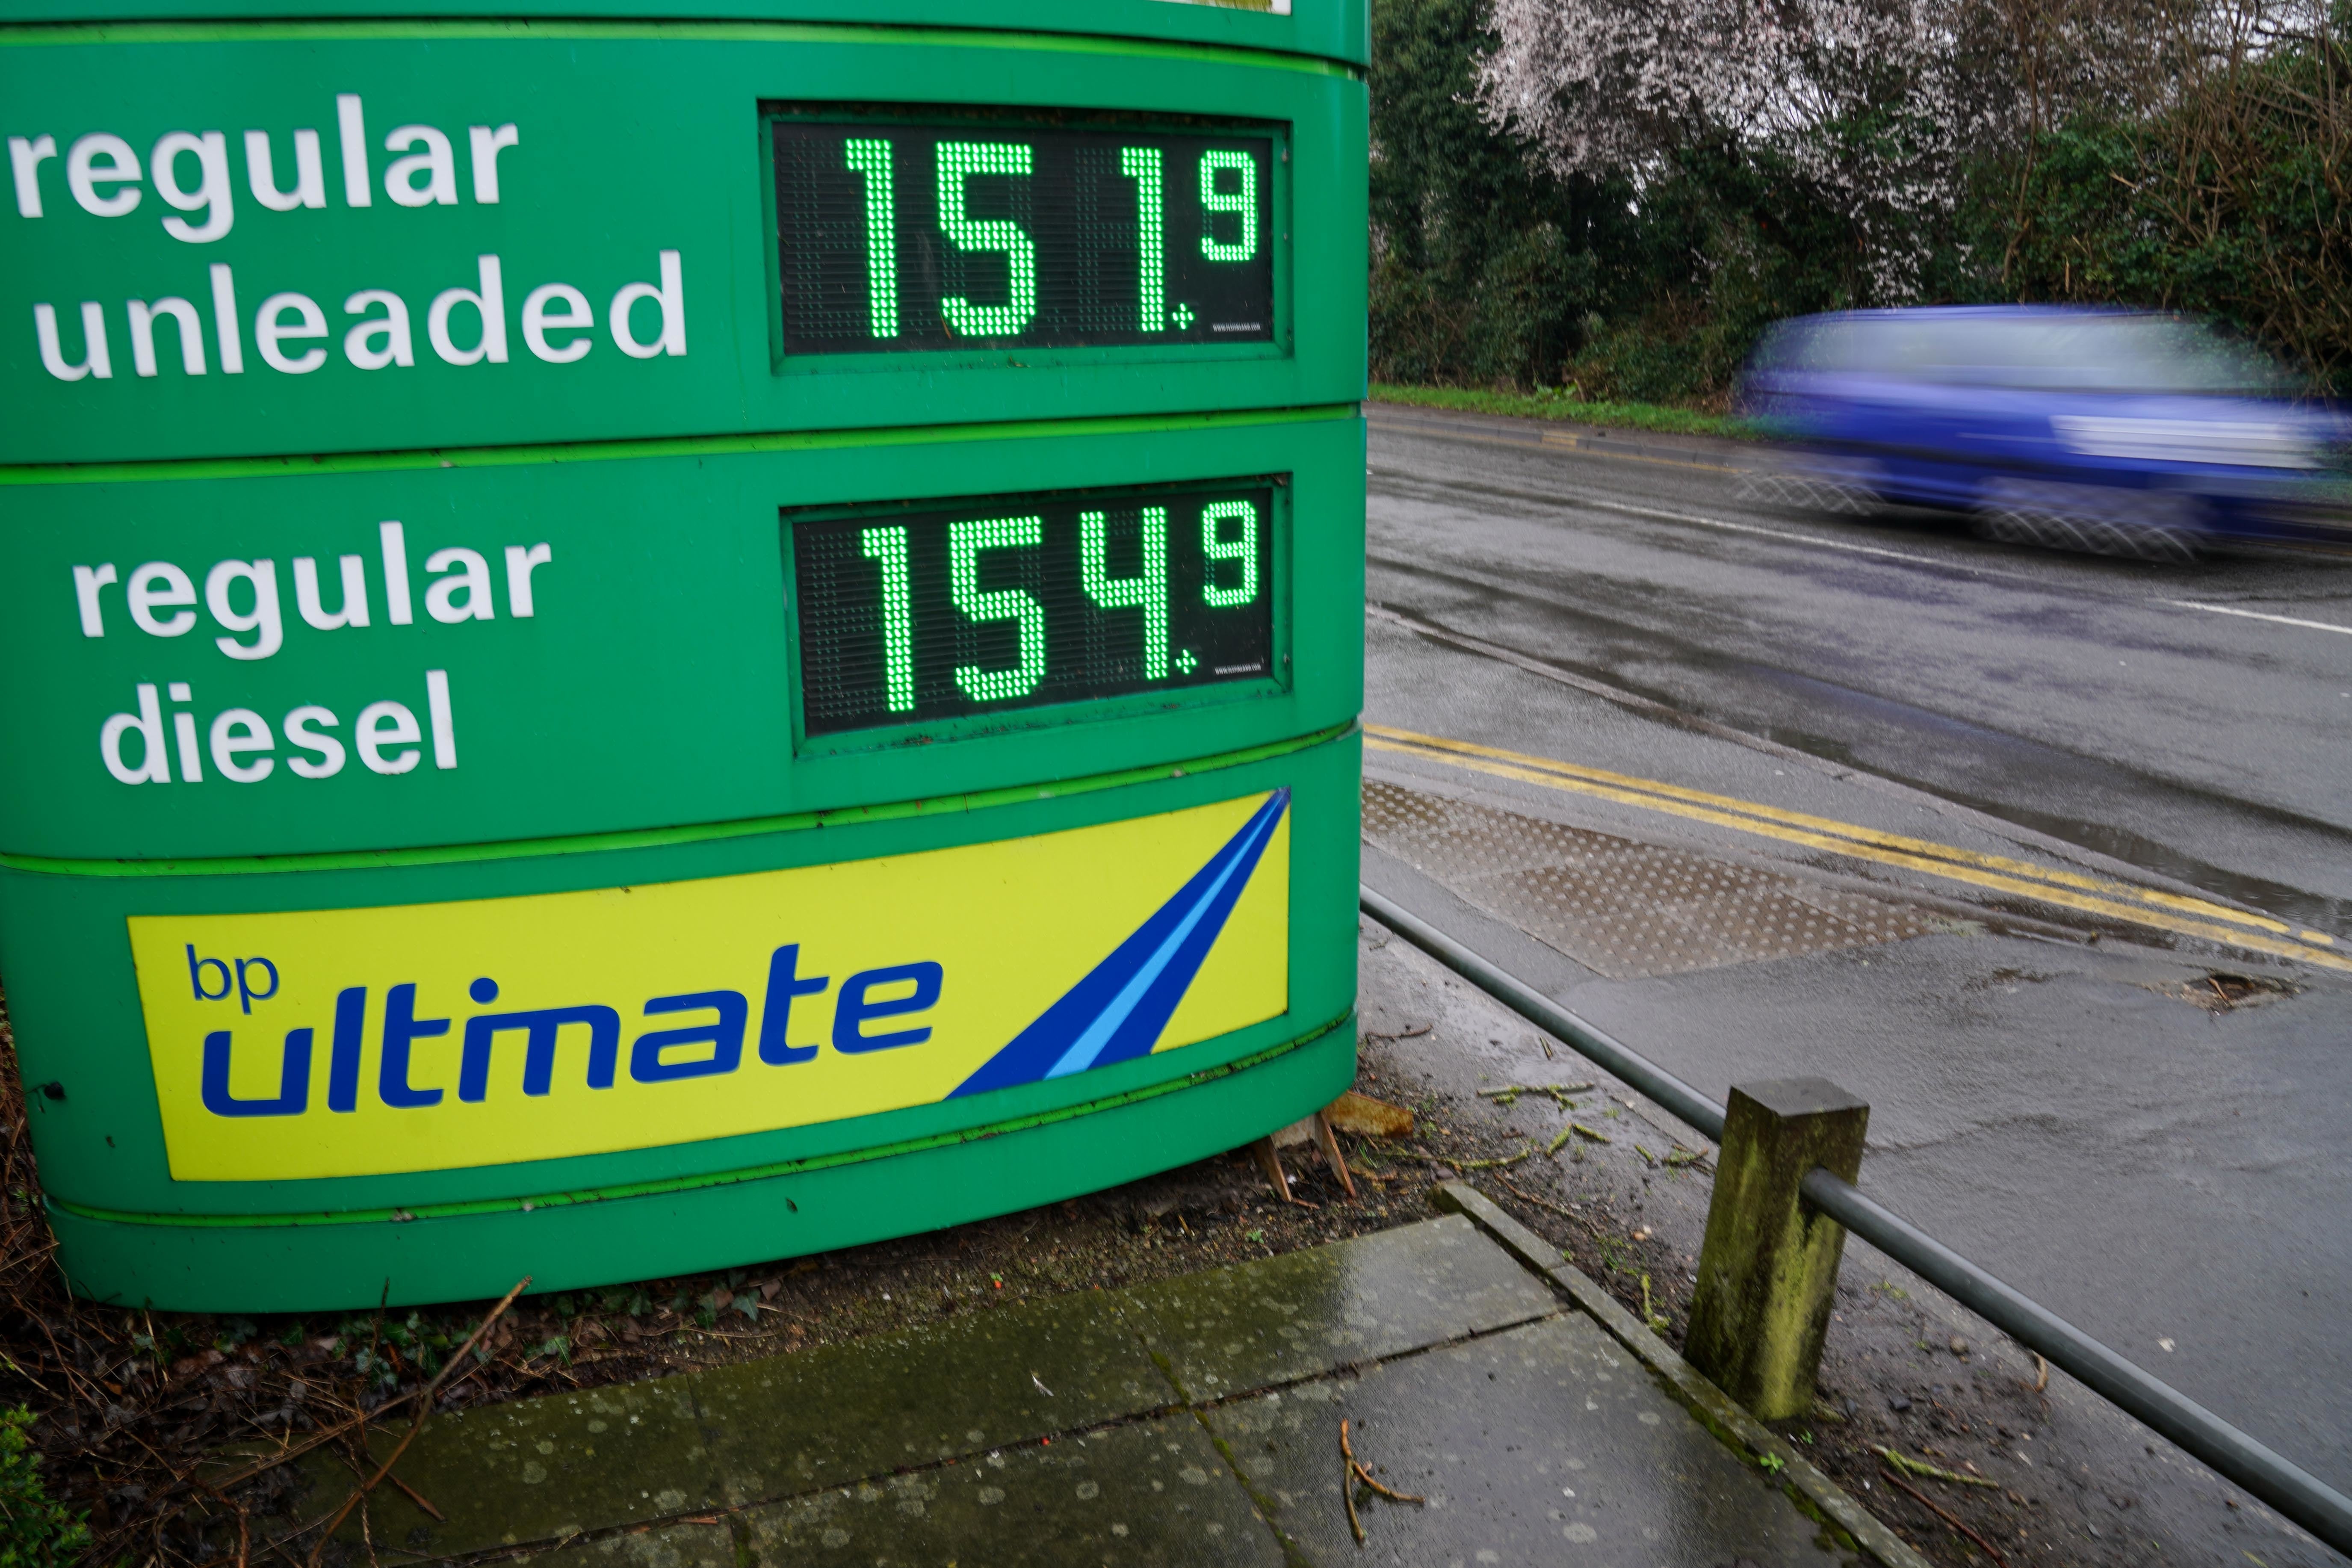 Fuel prices at a BP petrol station in Warwick. as average UK petrol prices exceeded £1.51 for the first time